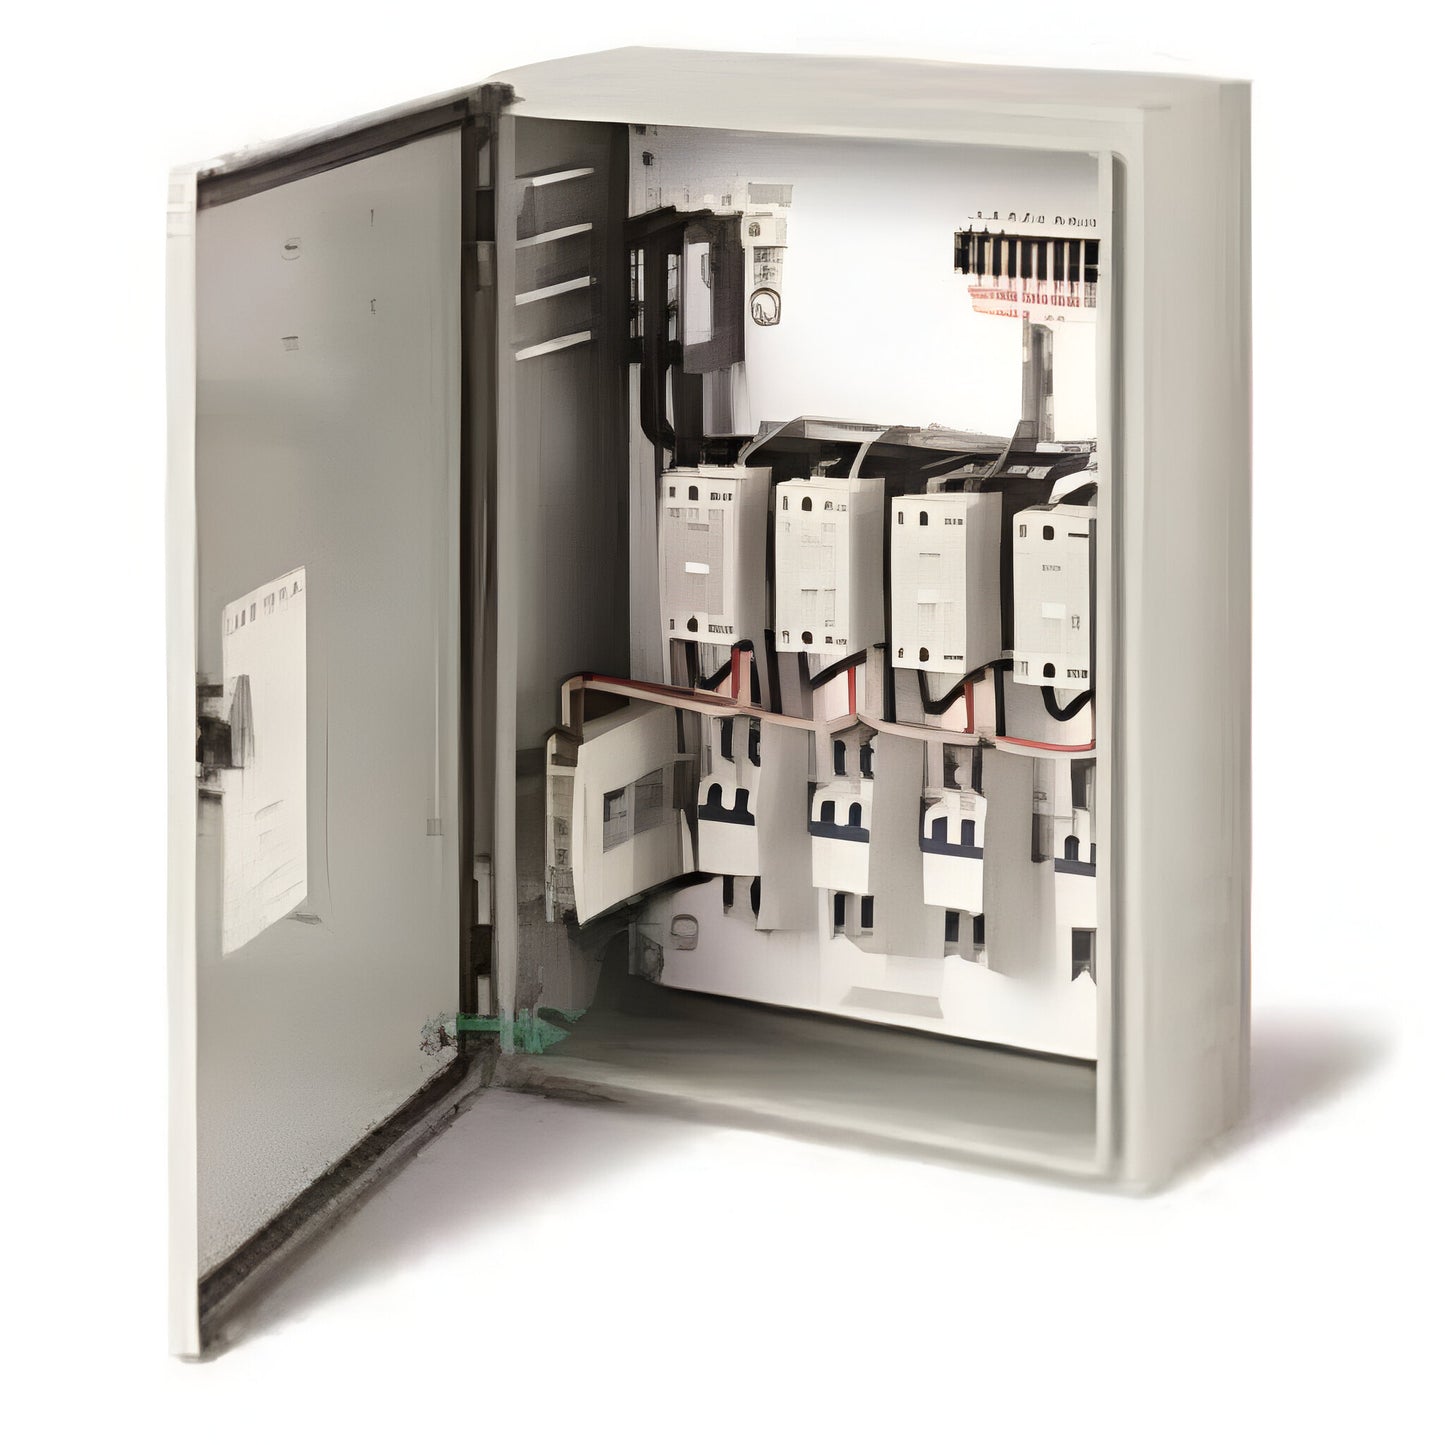 Home Management Relay Control Panel For Schwank Electric Heaters